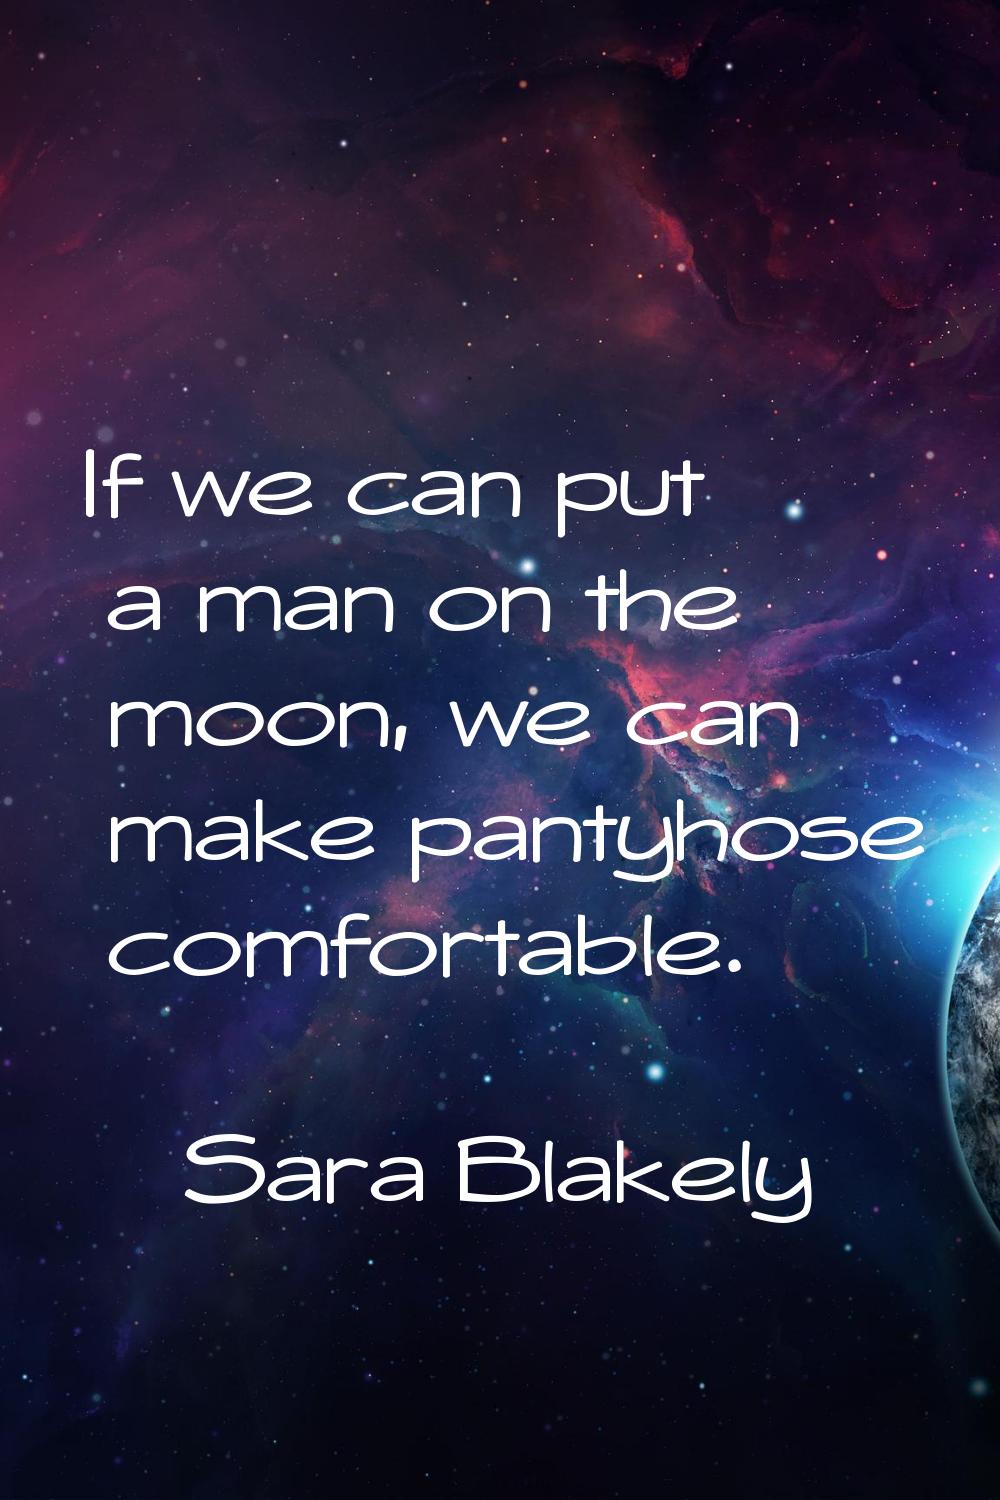 If we can put a man on the moon, we can make pantyhose comfortable.